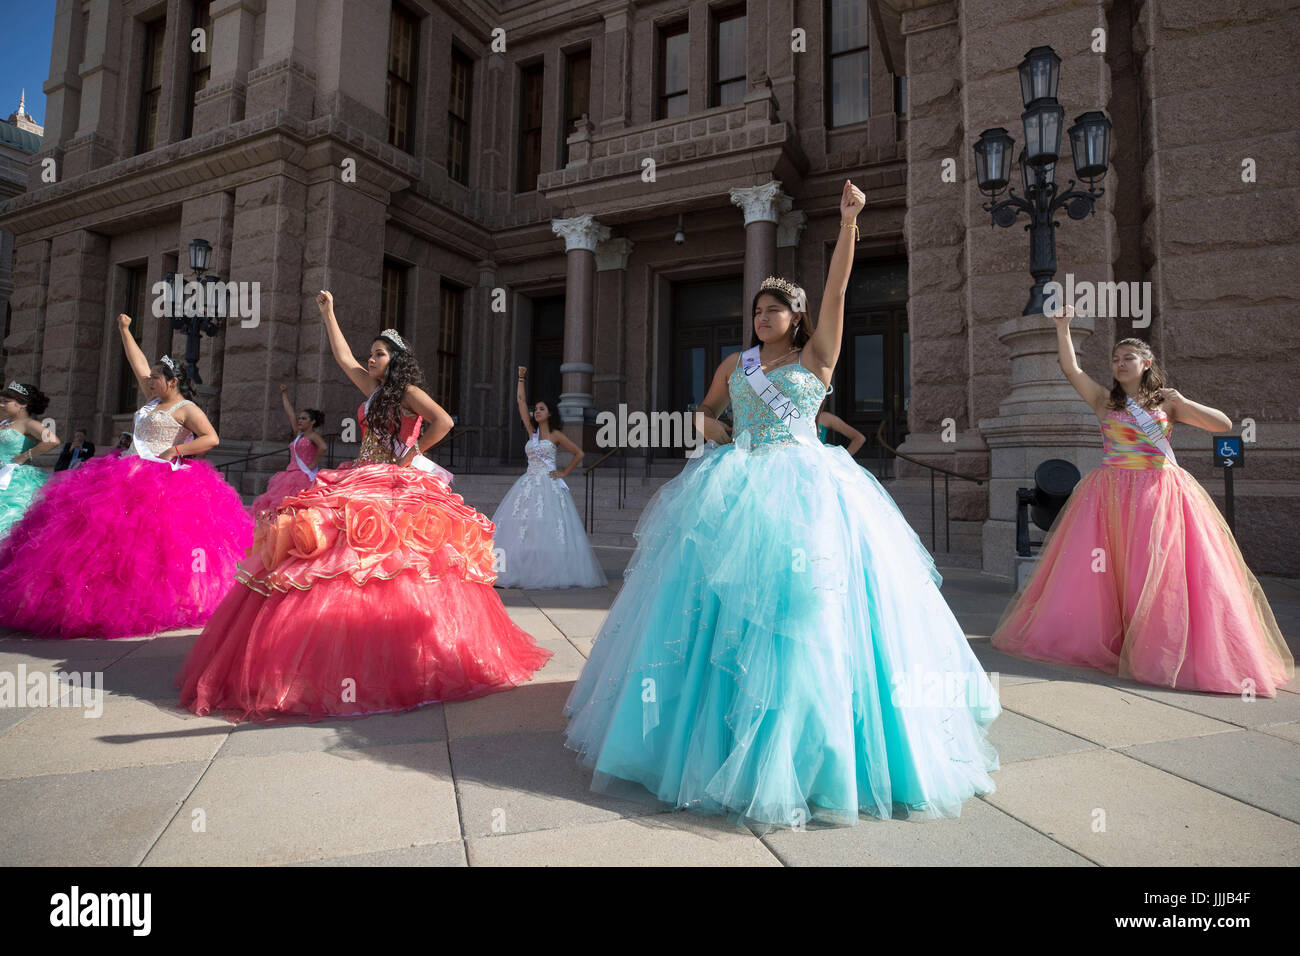 Teen girls wearing Mexican-style quinceanera dresses at the Texas Capitol protest SB4, passed by the legislature and signed by the governor in Spring 2017, a'Show me your papers' bill authorizing police to ask people to prove their immigration status at any time. Stock Photo